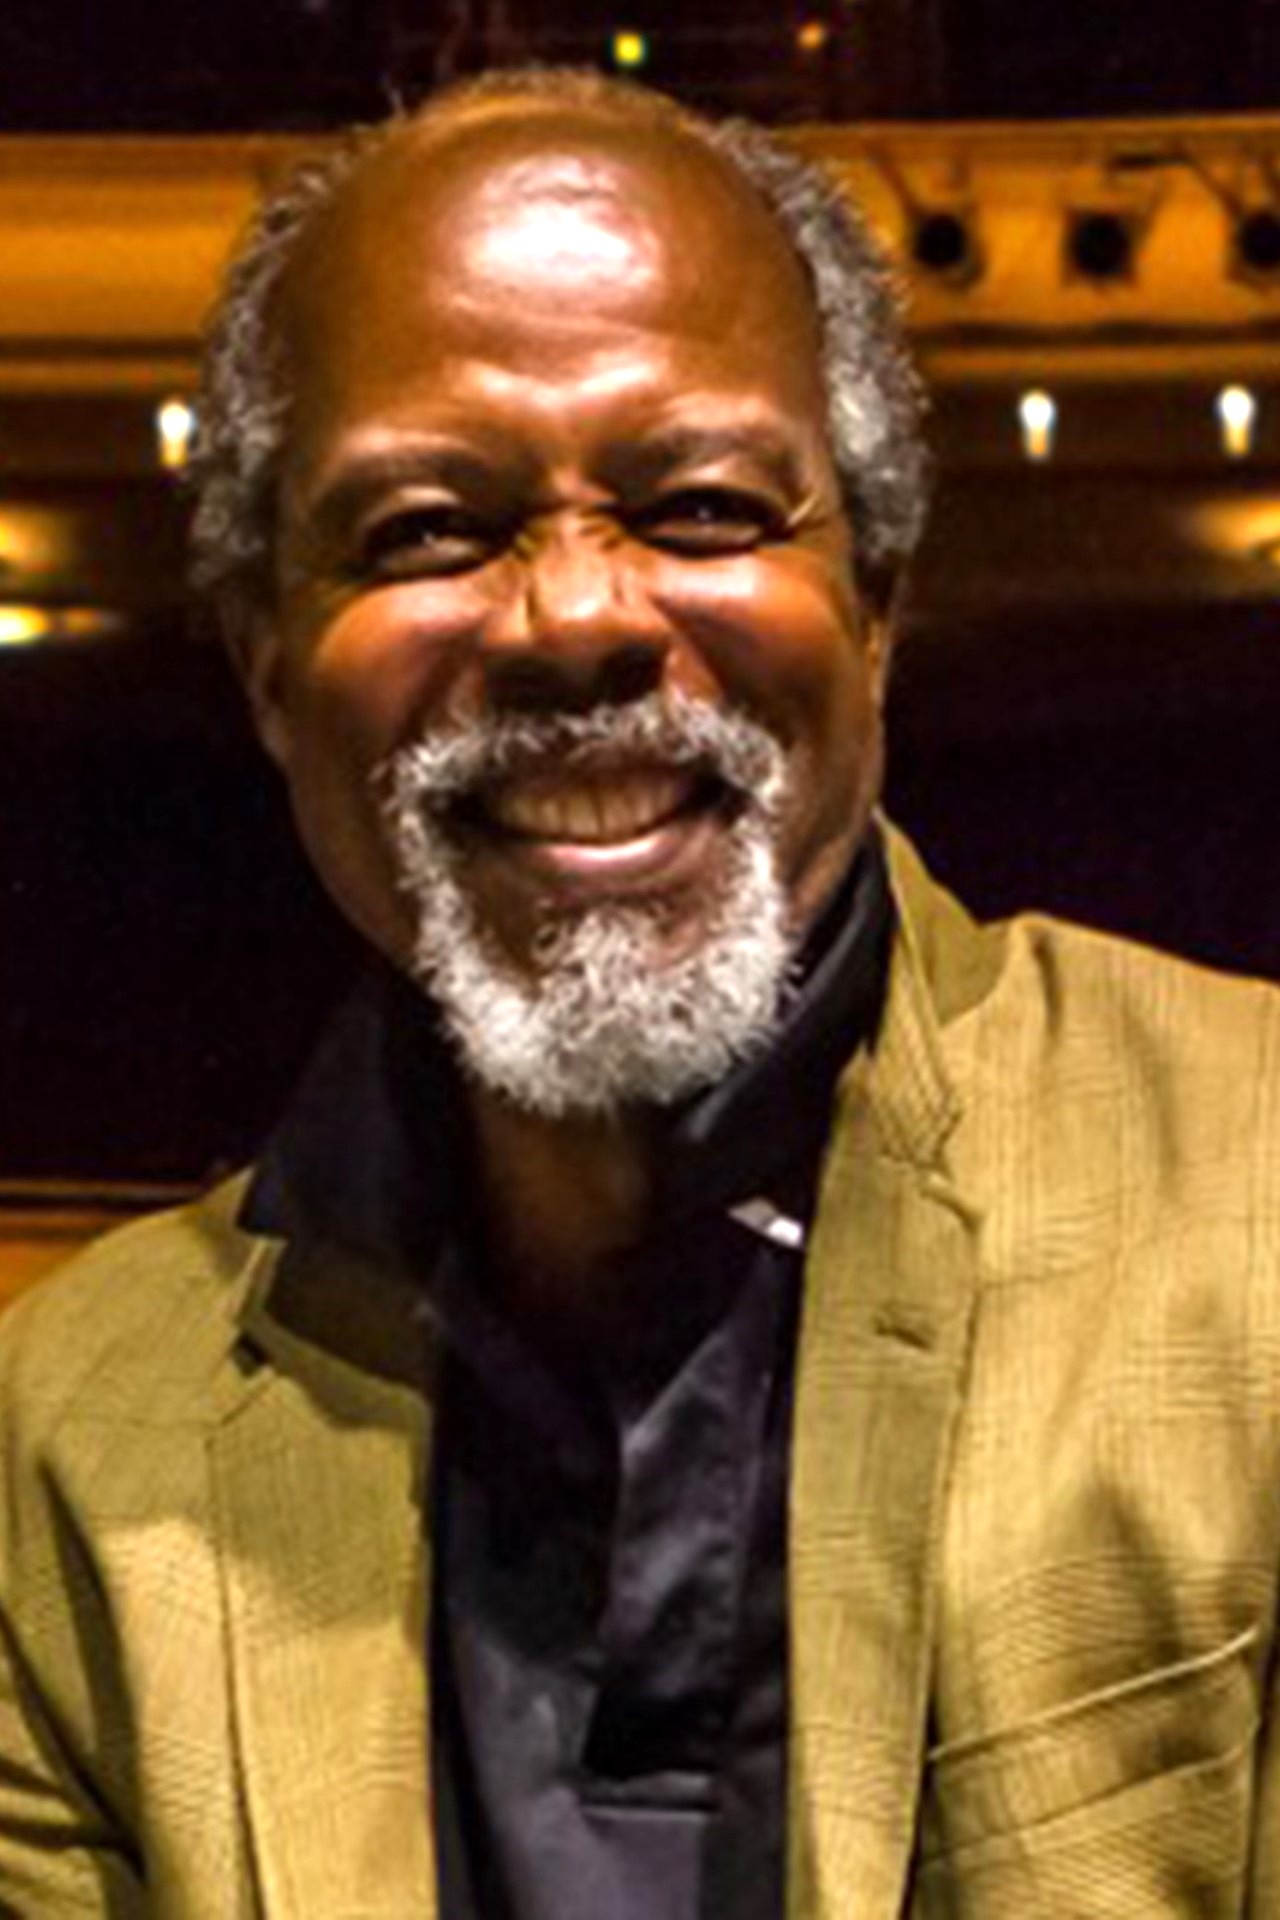 <p>Gilyard spent his later years teaching the trade to a new generation while also filming the occasional project.</p> <p>Image: WKTV Journal still by Ren1Man / Wikimedia</p>